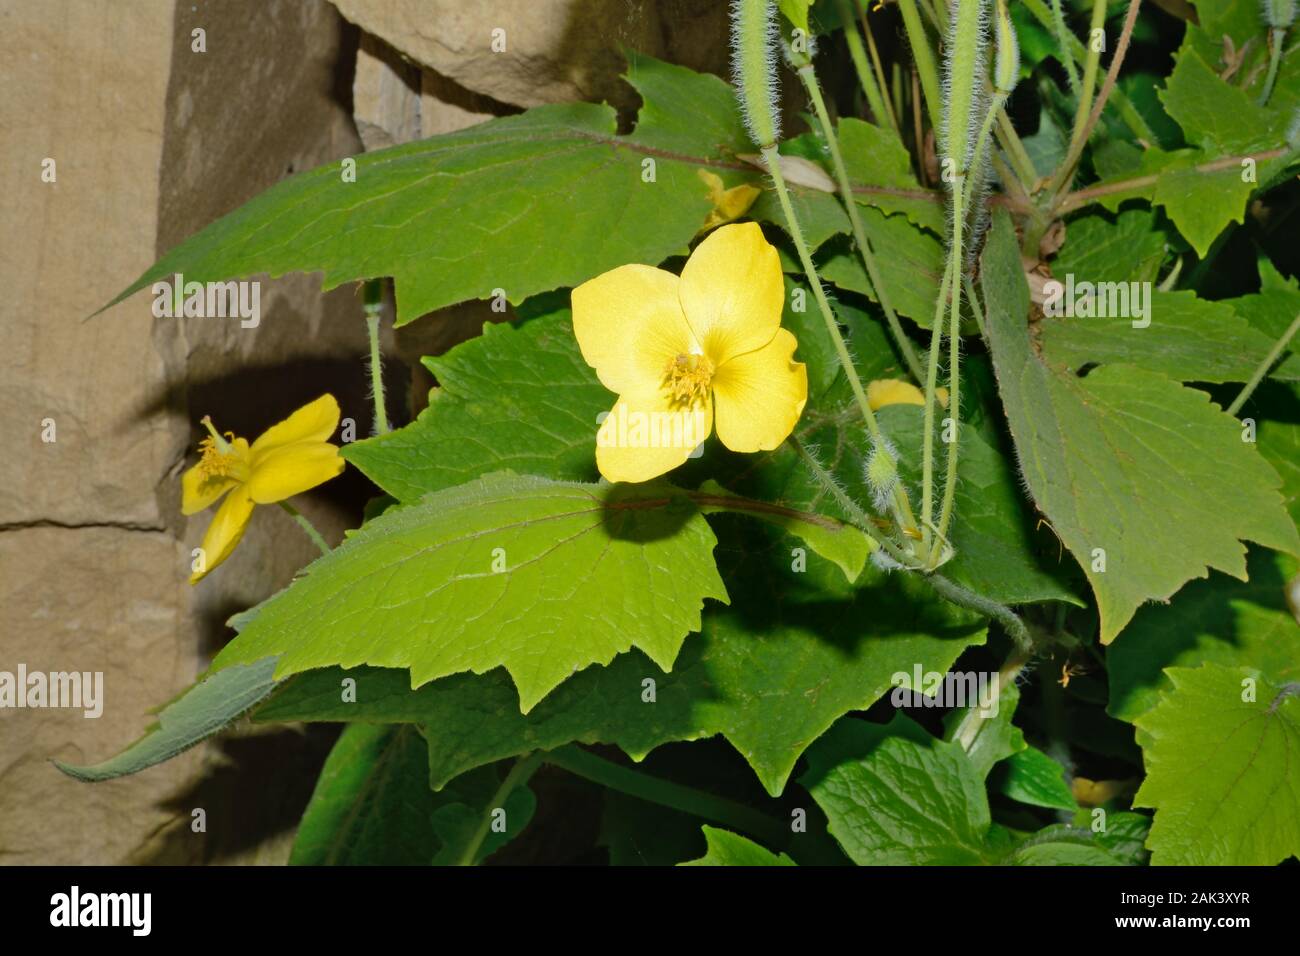 Stylophorum lasiocarpum (Chinese celandine poppy) is a woodland species native to central and eastern China. Stock Photo